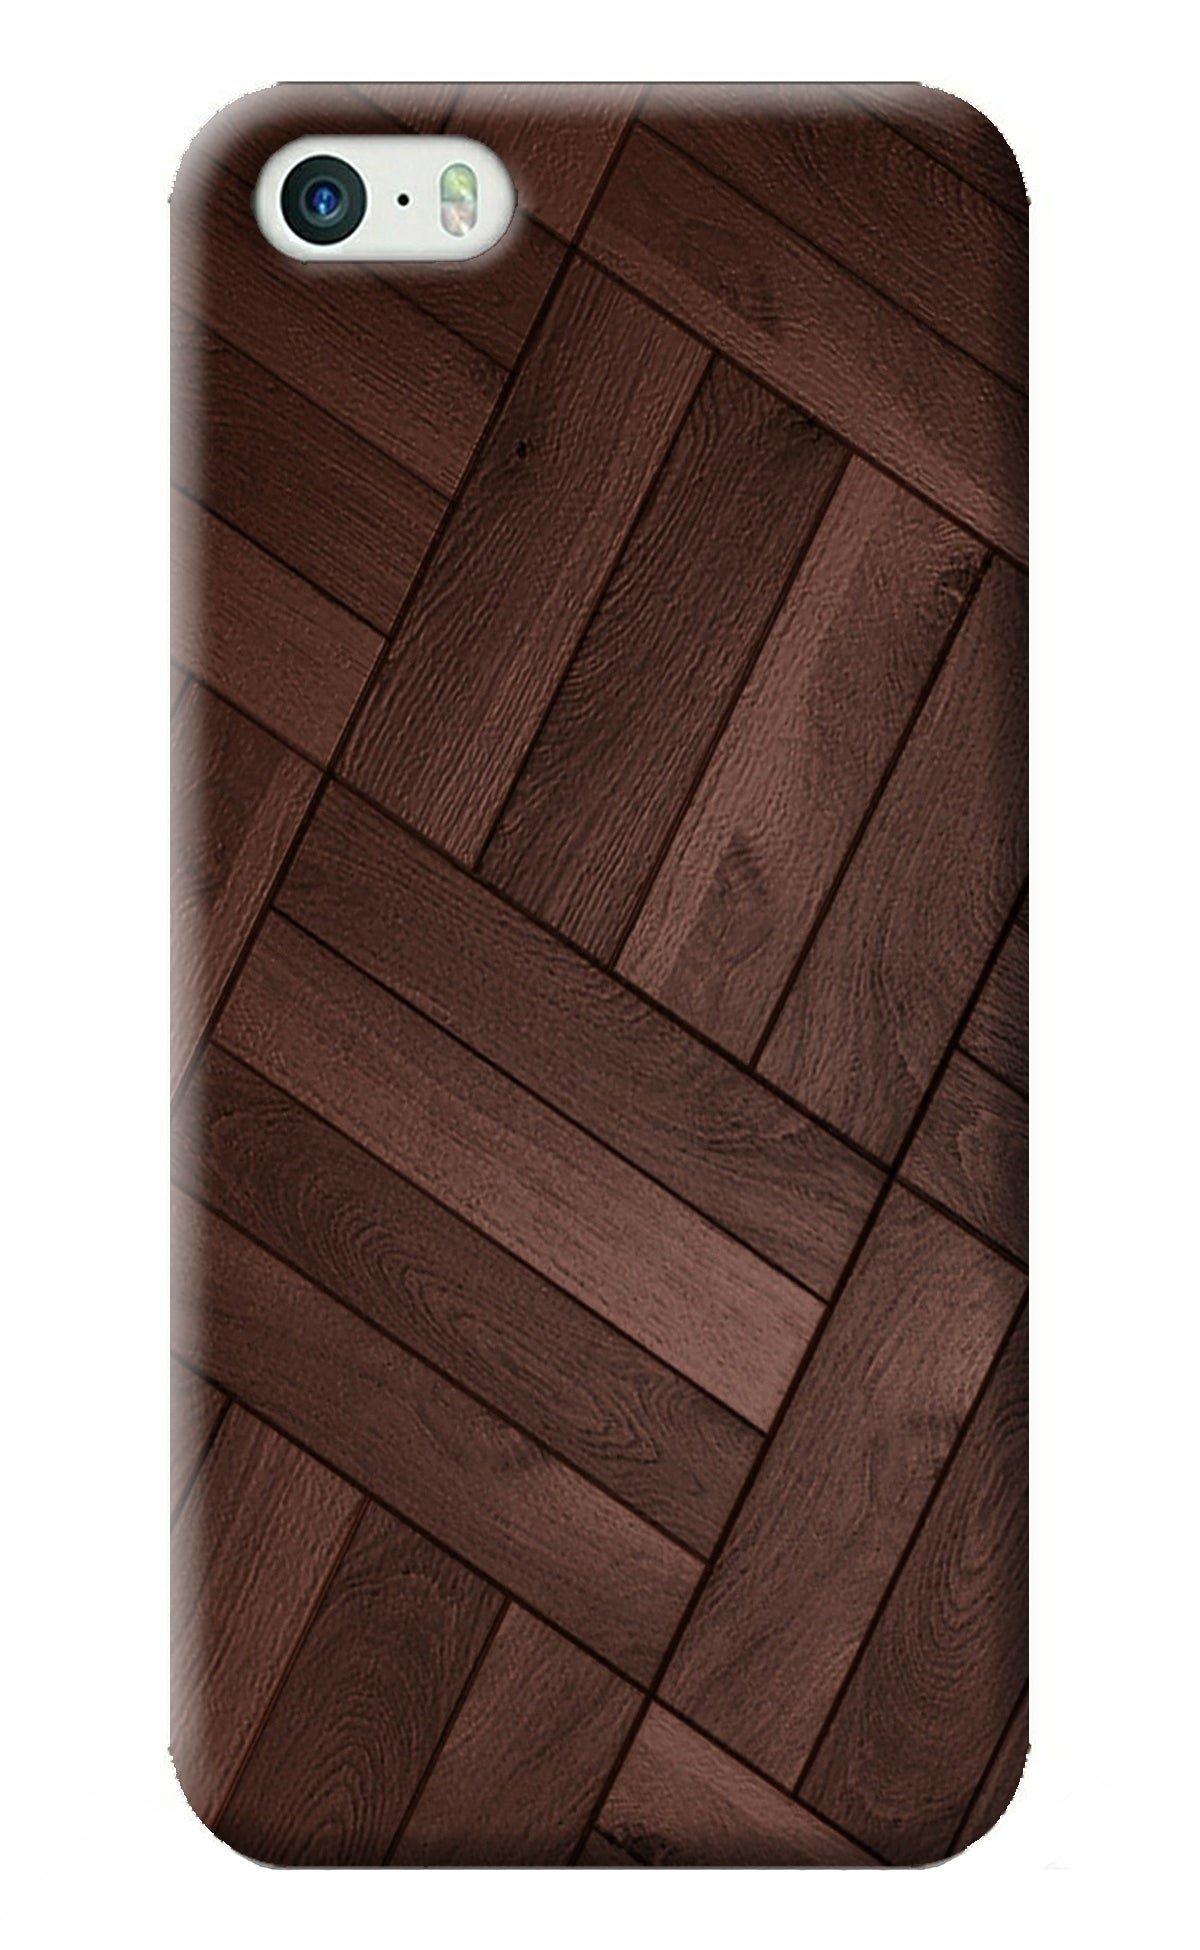 Wooden Texture Design iPhone 5/5s Back Cover